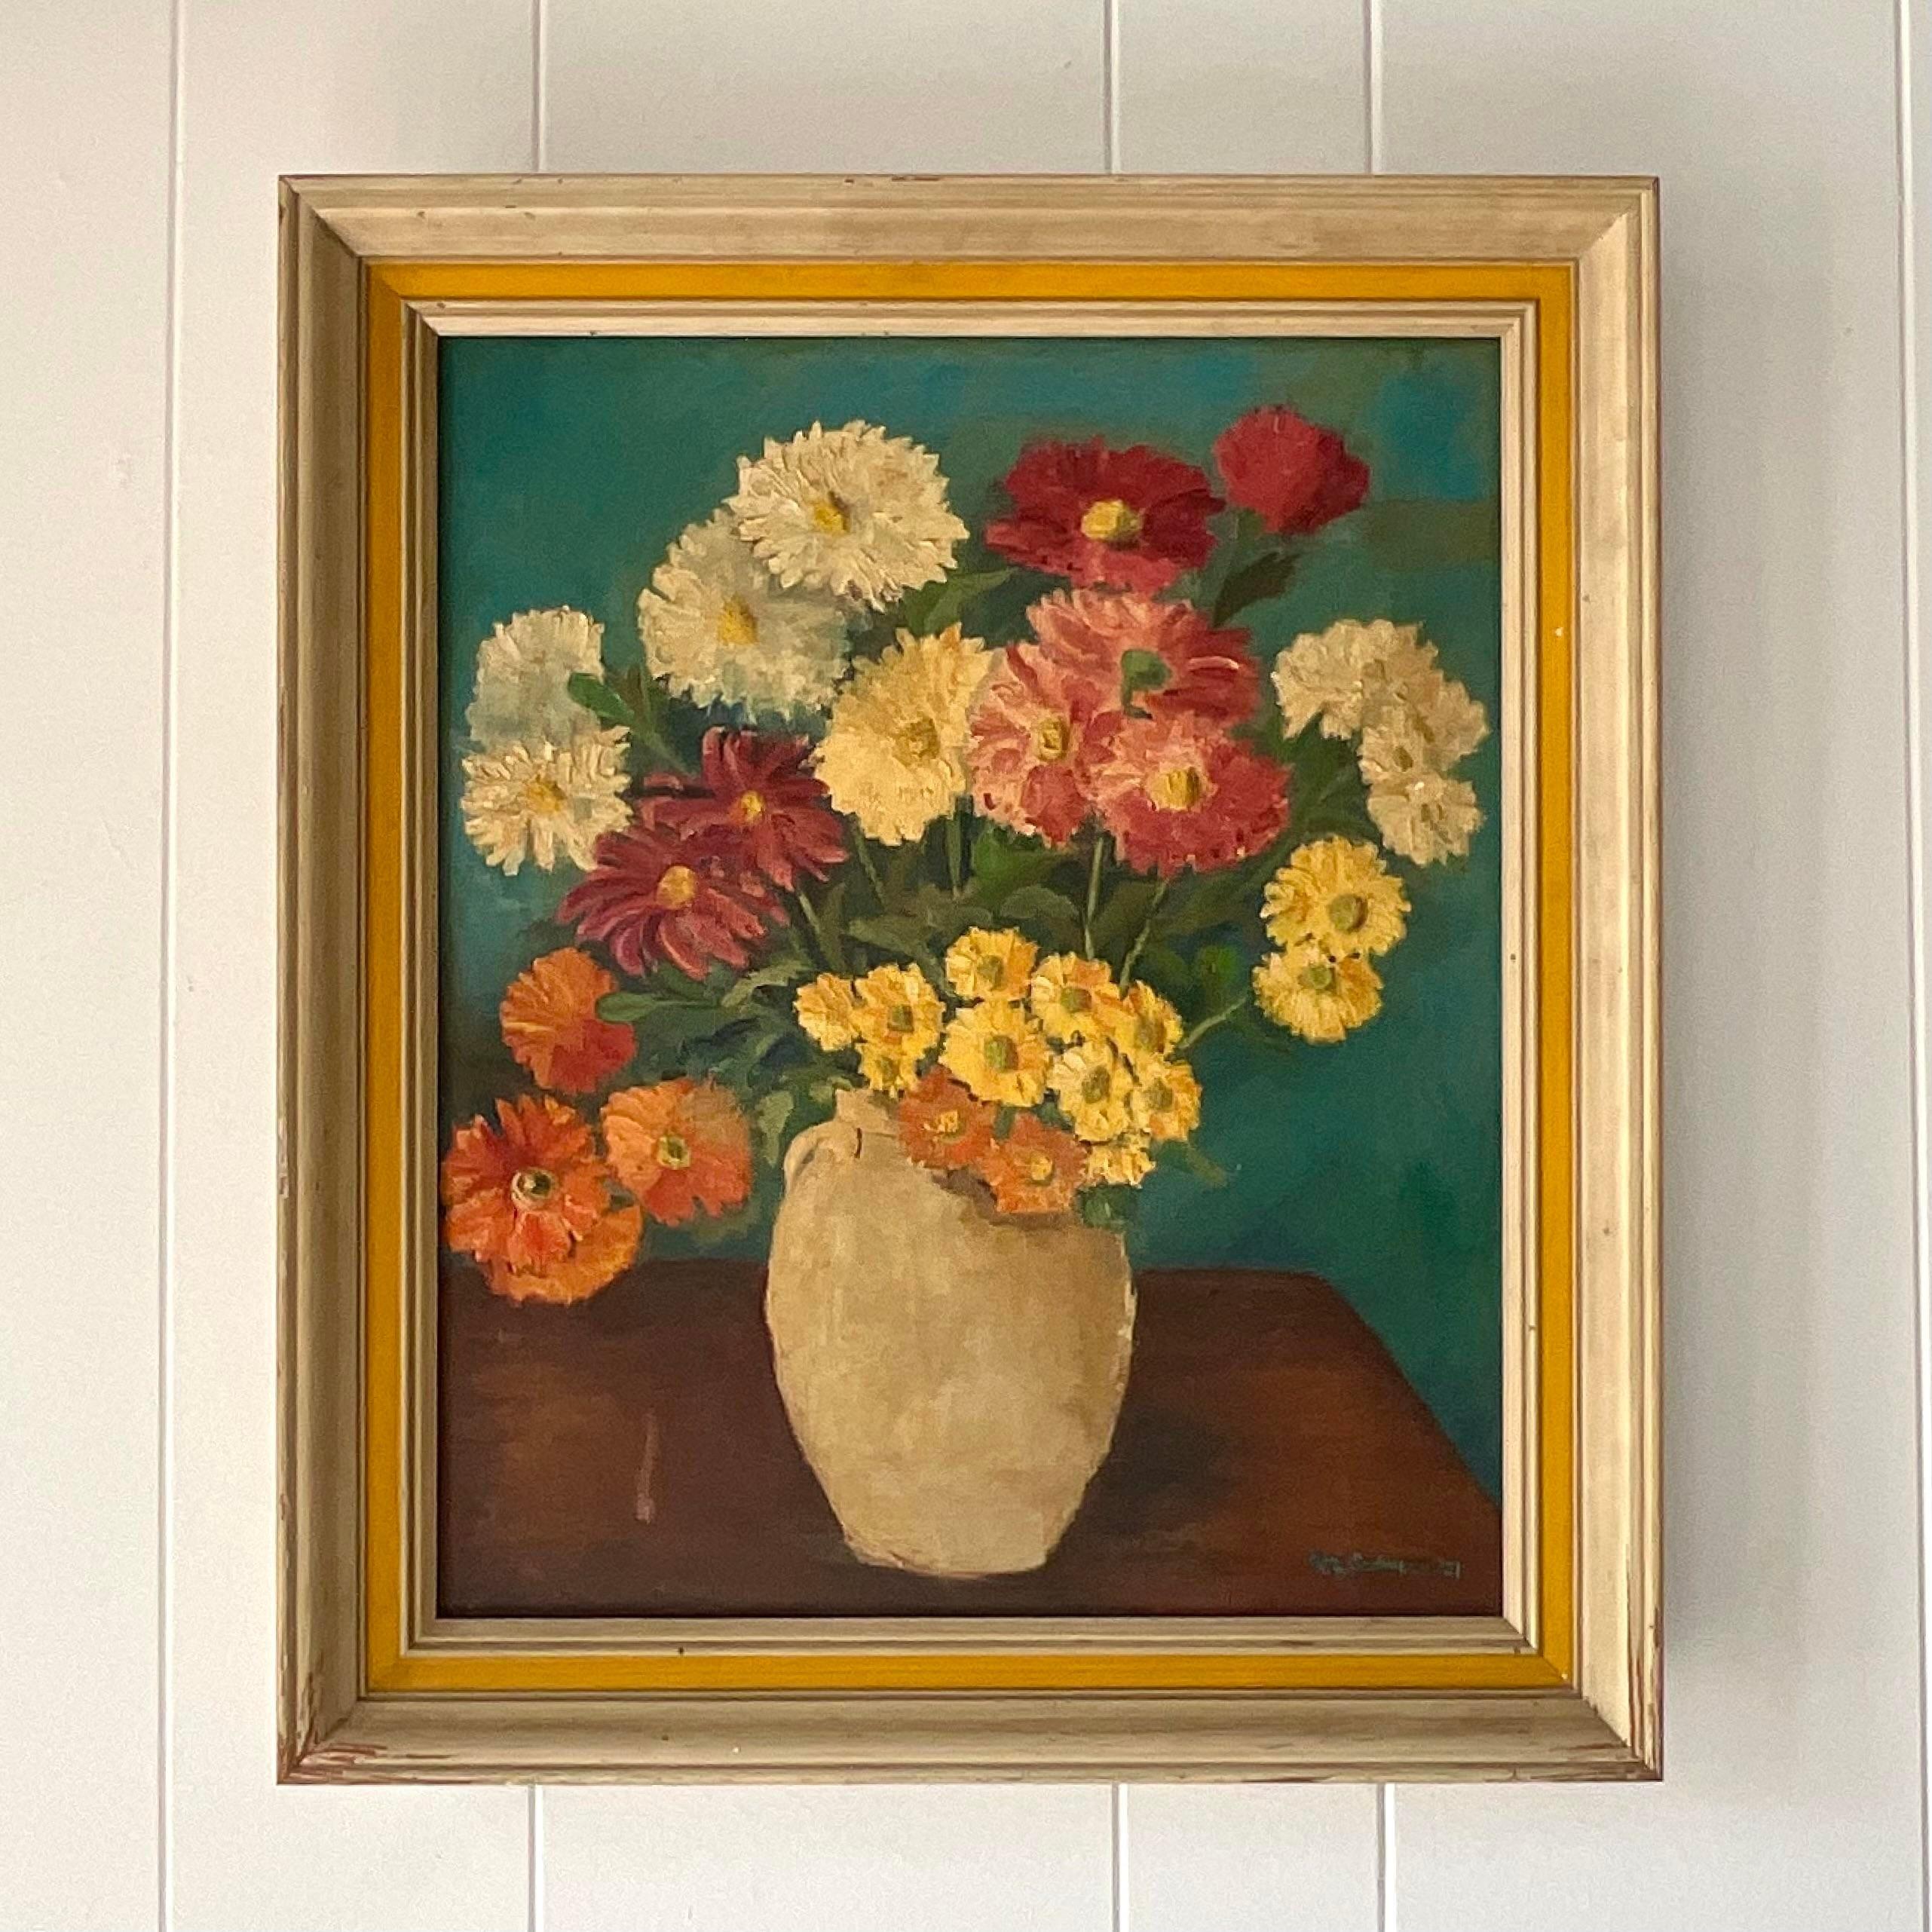 A fantastic vintage Coastal original oil on canvas. A beautiful floral composition in warm rich colors. A chic period frame in white and yellow. Signed and dated by the artist. Acquired from a Palm Beach estate.